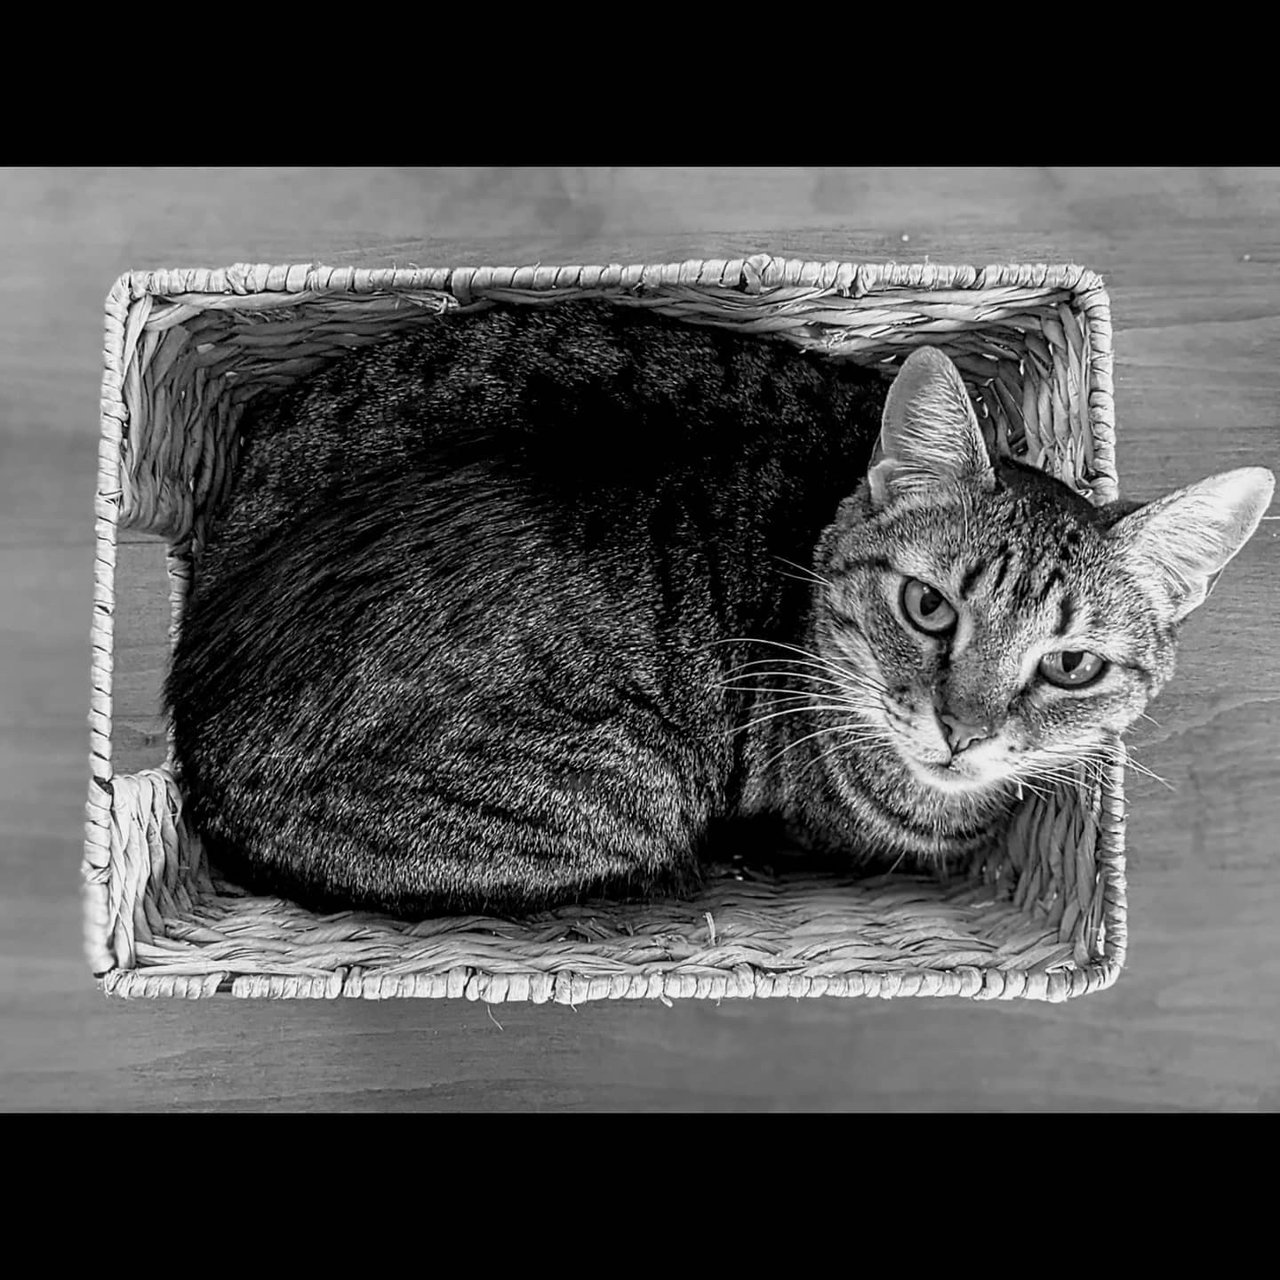 A black and white photo of a tabby cat, lying in a small basket looking up at the camera.